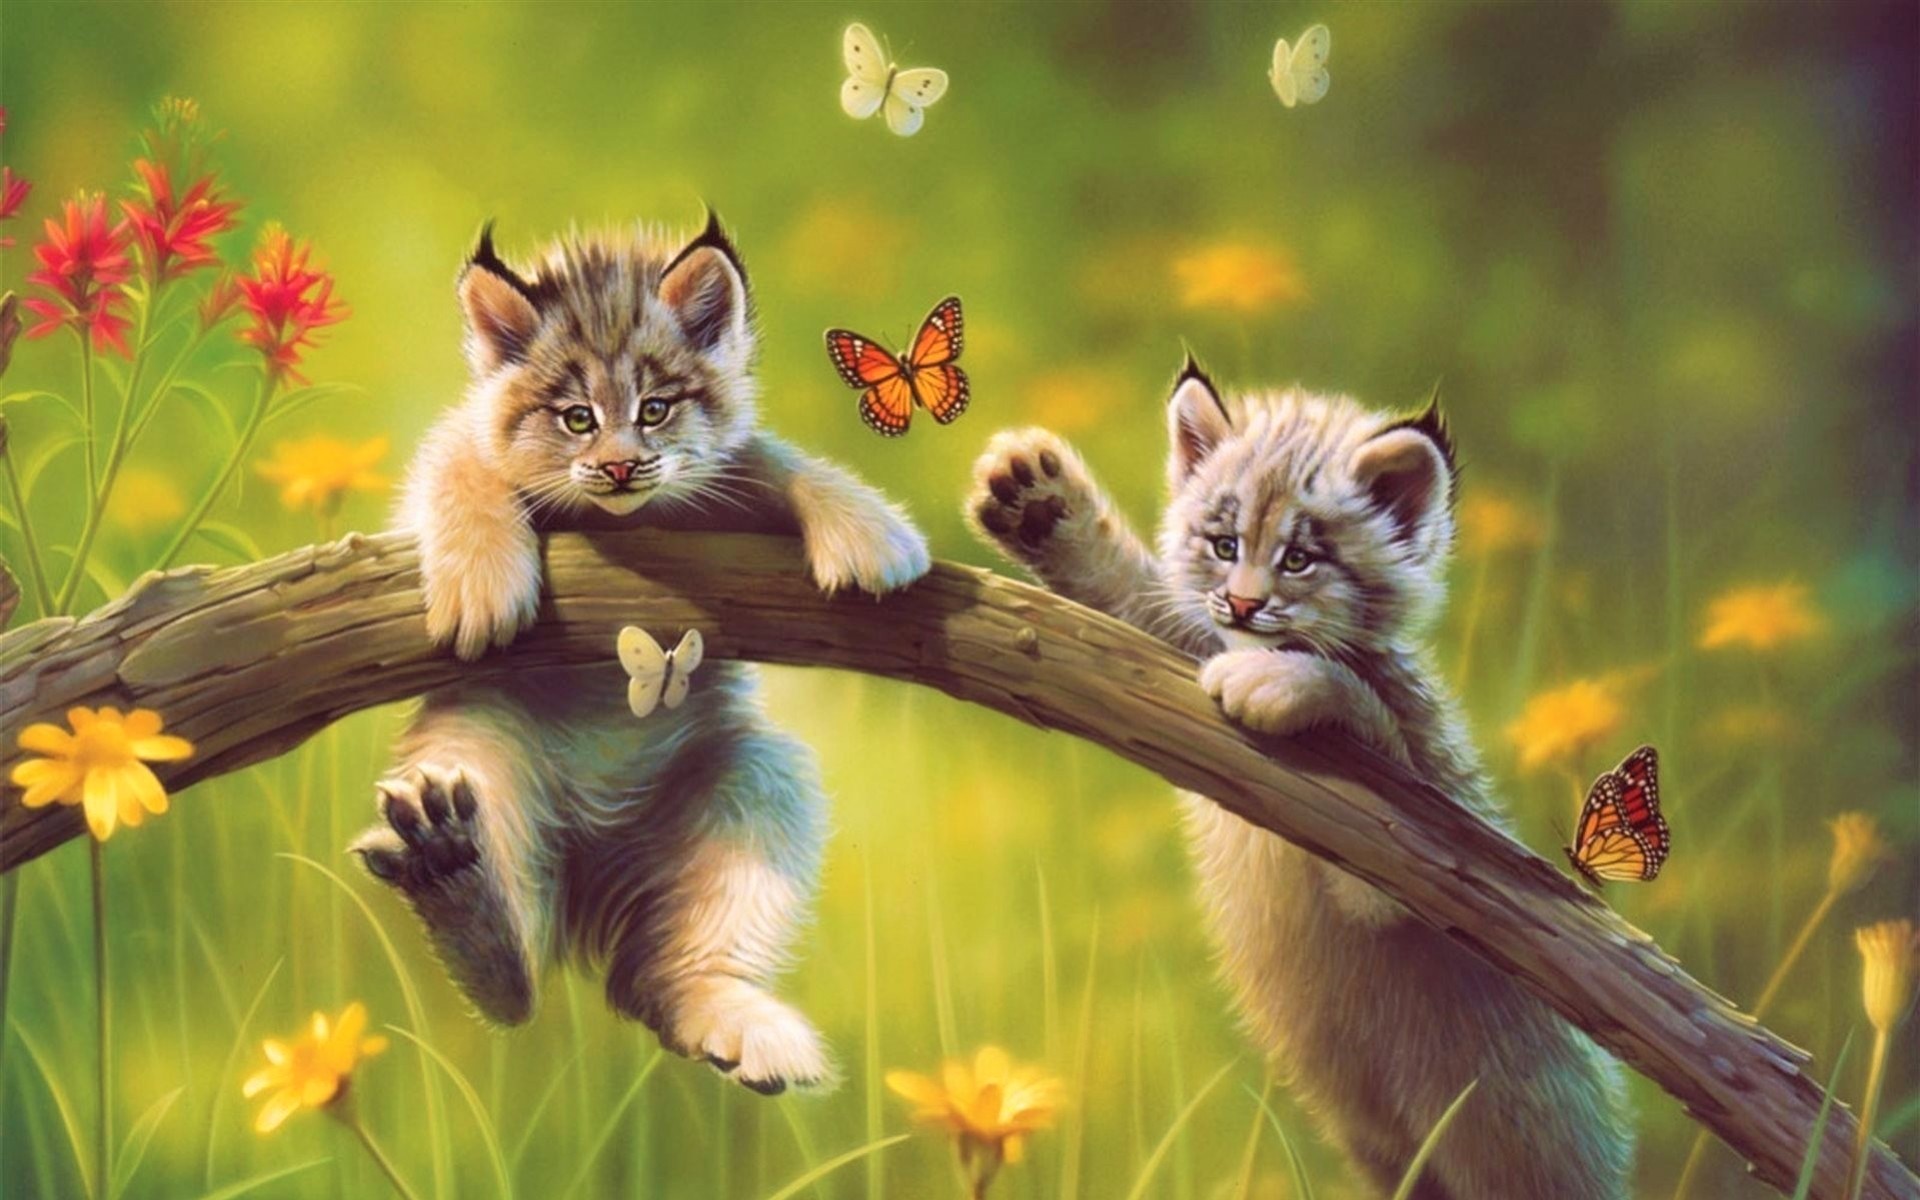 artistic, painting, baby animal, butterfly, cat, cub, cute, lynx, meadow